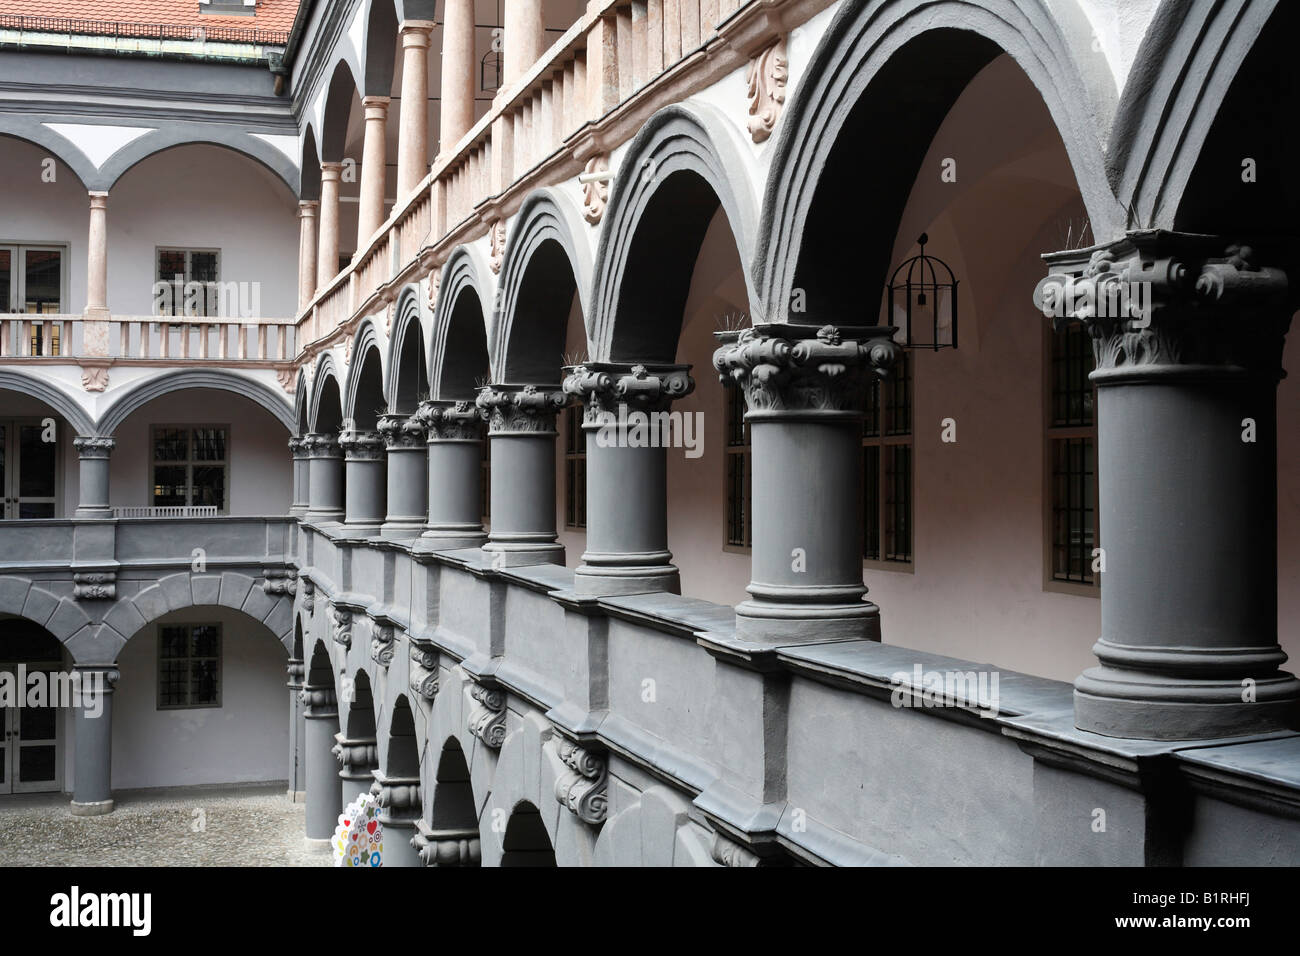 Inner courtyard of the Ehemaliges Hauptmuenzamt, former main mint, historic city centre, Munich, Bavaria, Germany, Europe Stock Photo